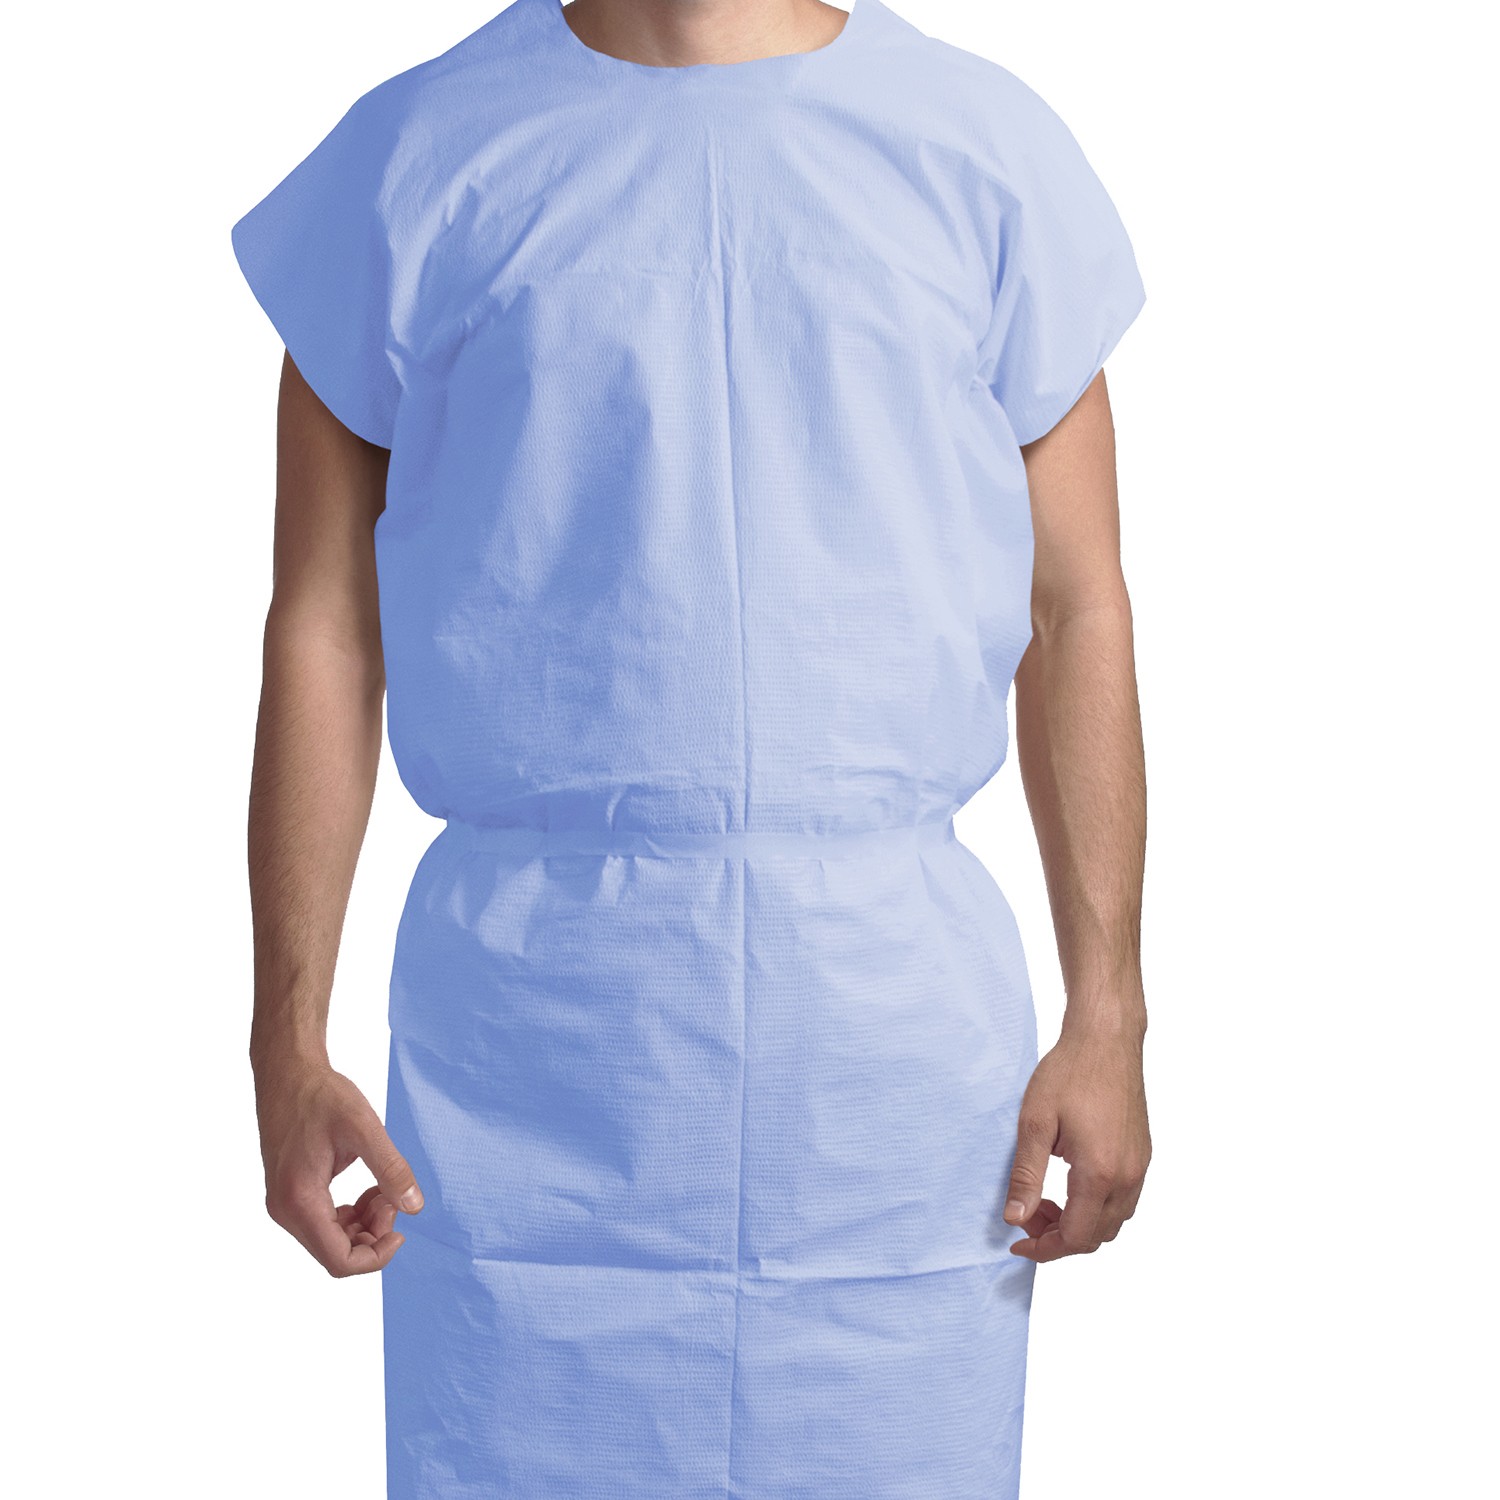 Gowns and Clothing  - Patient Exam